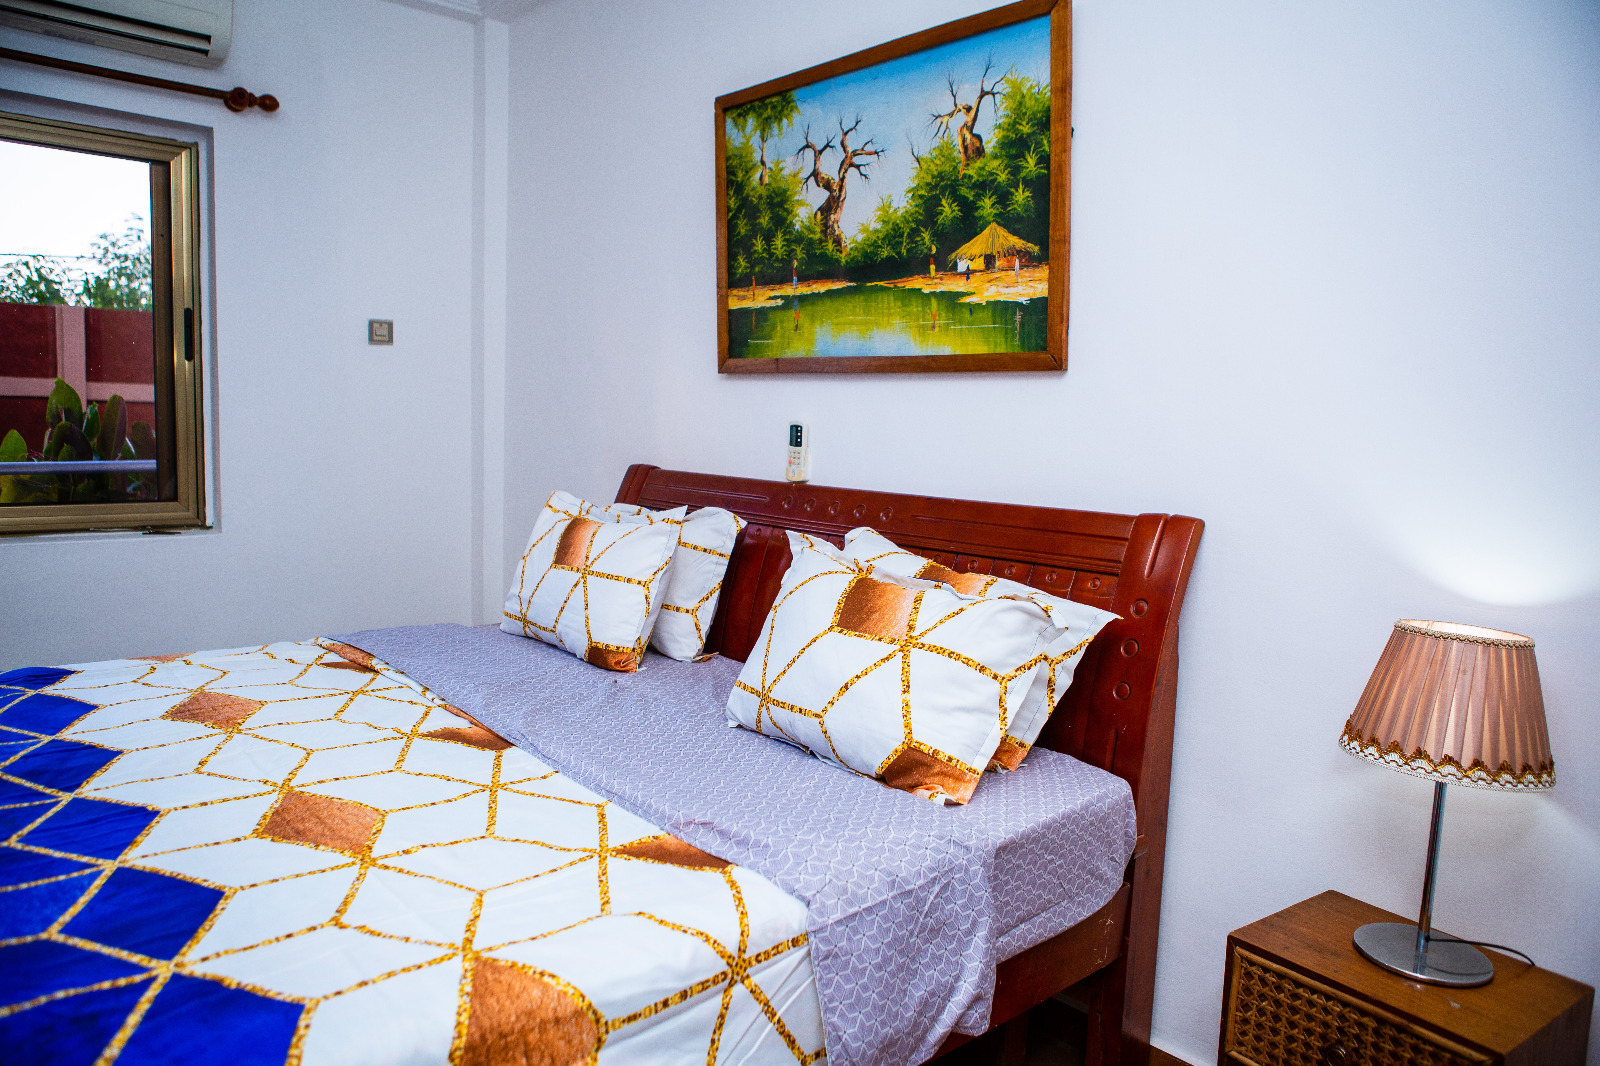 Two (2) Bedroom Furnished Apartment for Rent at Dzorwulu